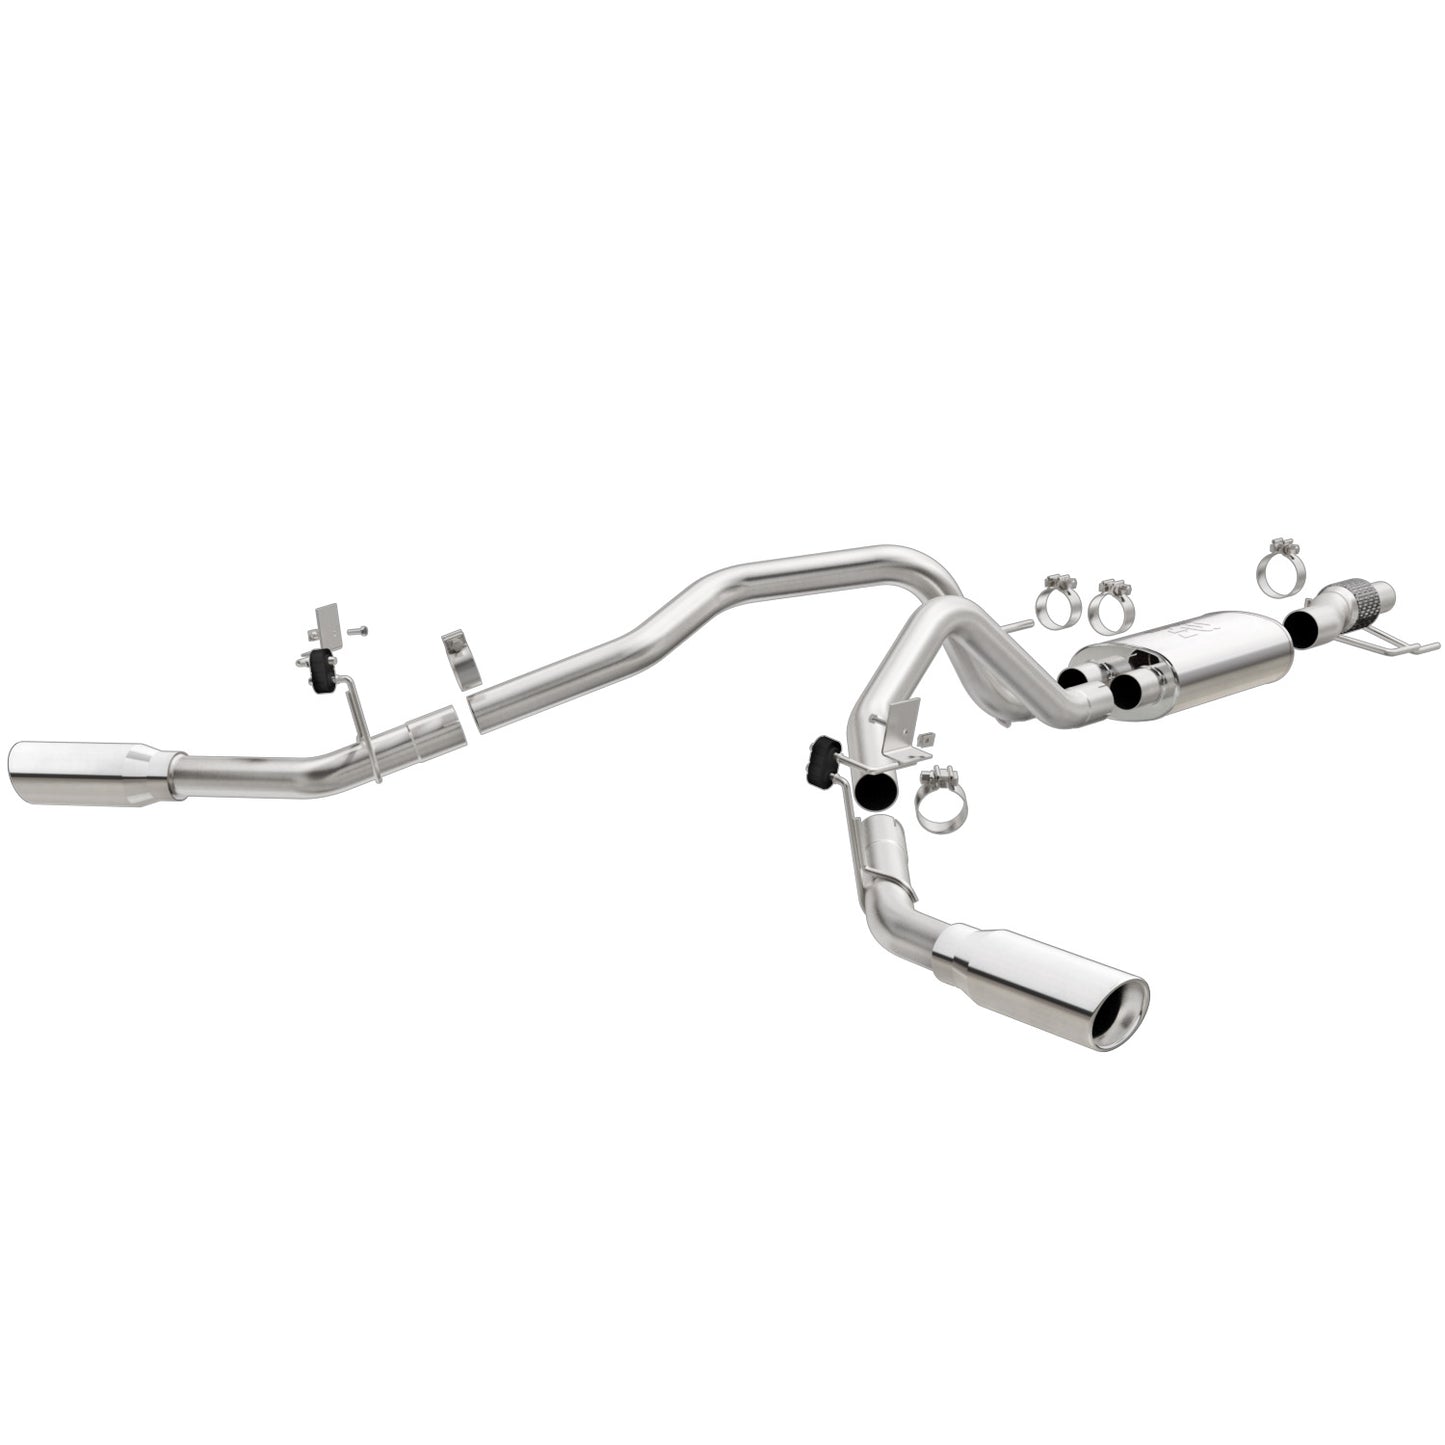 MagnaFlow Street Series Cat-Back Performance Exhaust System 19198